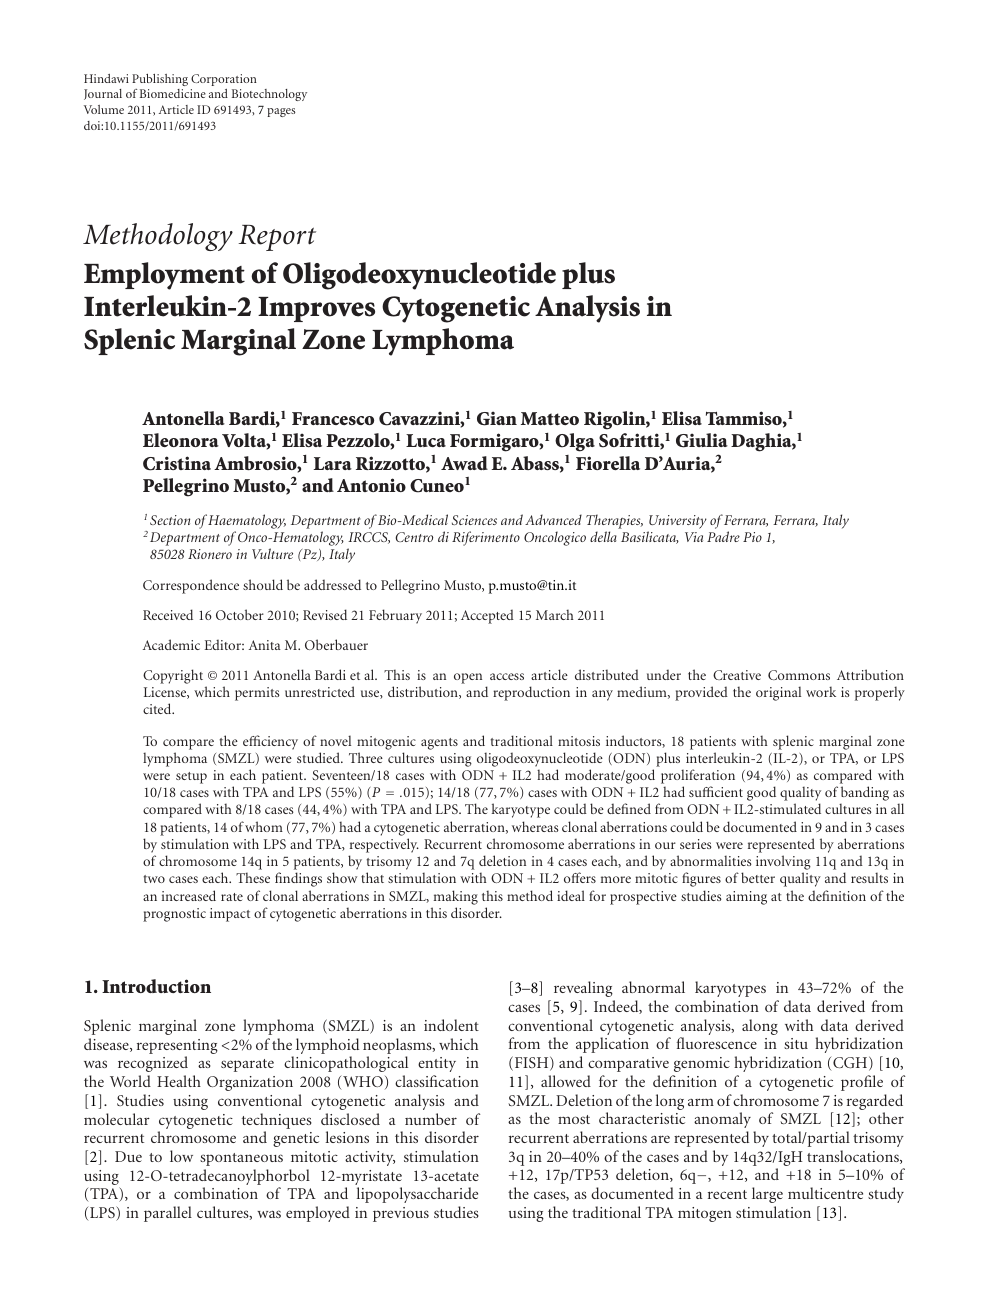 Employment Of Oligodeoxynucleotide Plus Interleukin 2 Improves Cytogenetic Analysis In Splenic Marginal Zone Lymphoma Topic Of Research Paper In Clinical Medicine Download Scholarly Article Pdf And Read For Free On Cyberleninka Open